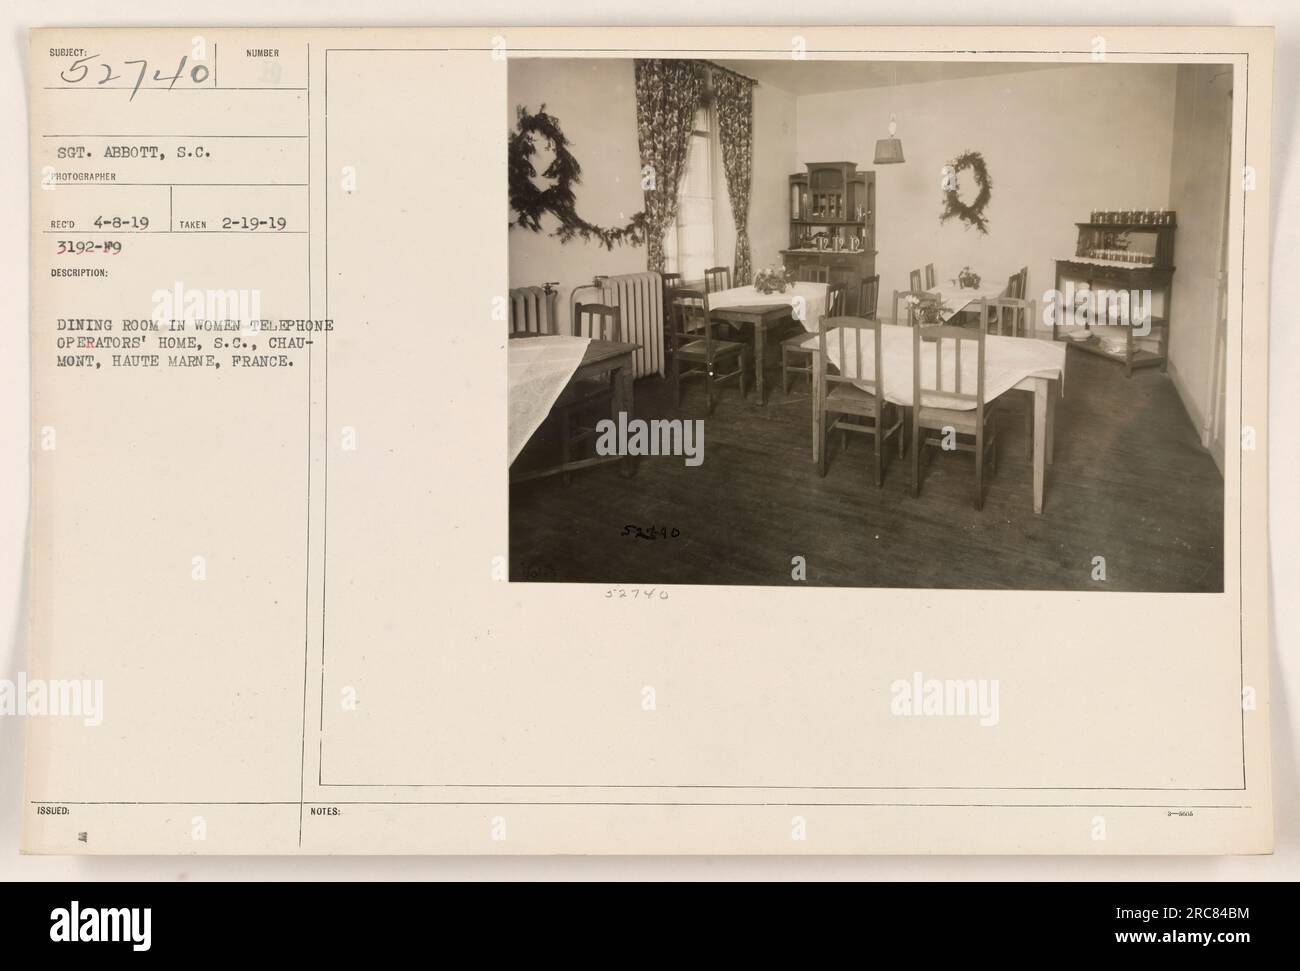 Caption: Dining room in women telephone operators' home at S.C. Chaumont, Haute Marne, France. The photograph, taken on February 19, 1919, showcases the living conditions of the Hello Girls during World War I. Sergeant Abbott, an Signal Corps photographer, captured this image, which was later issued as part of the military records. Stock Photo